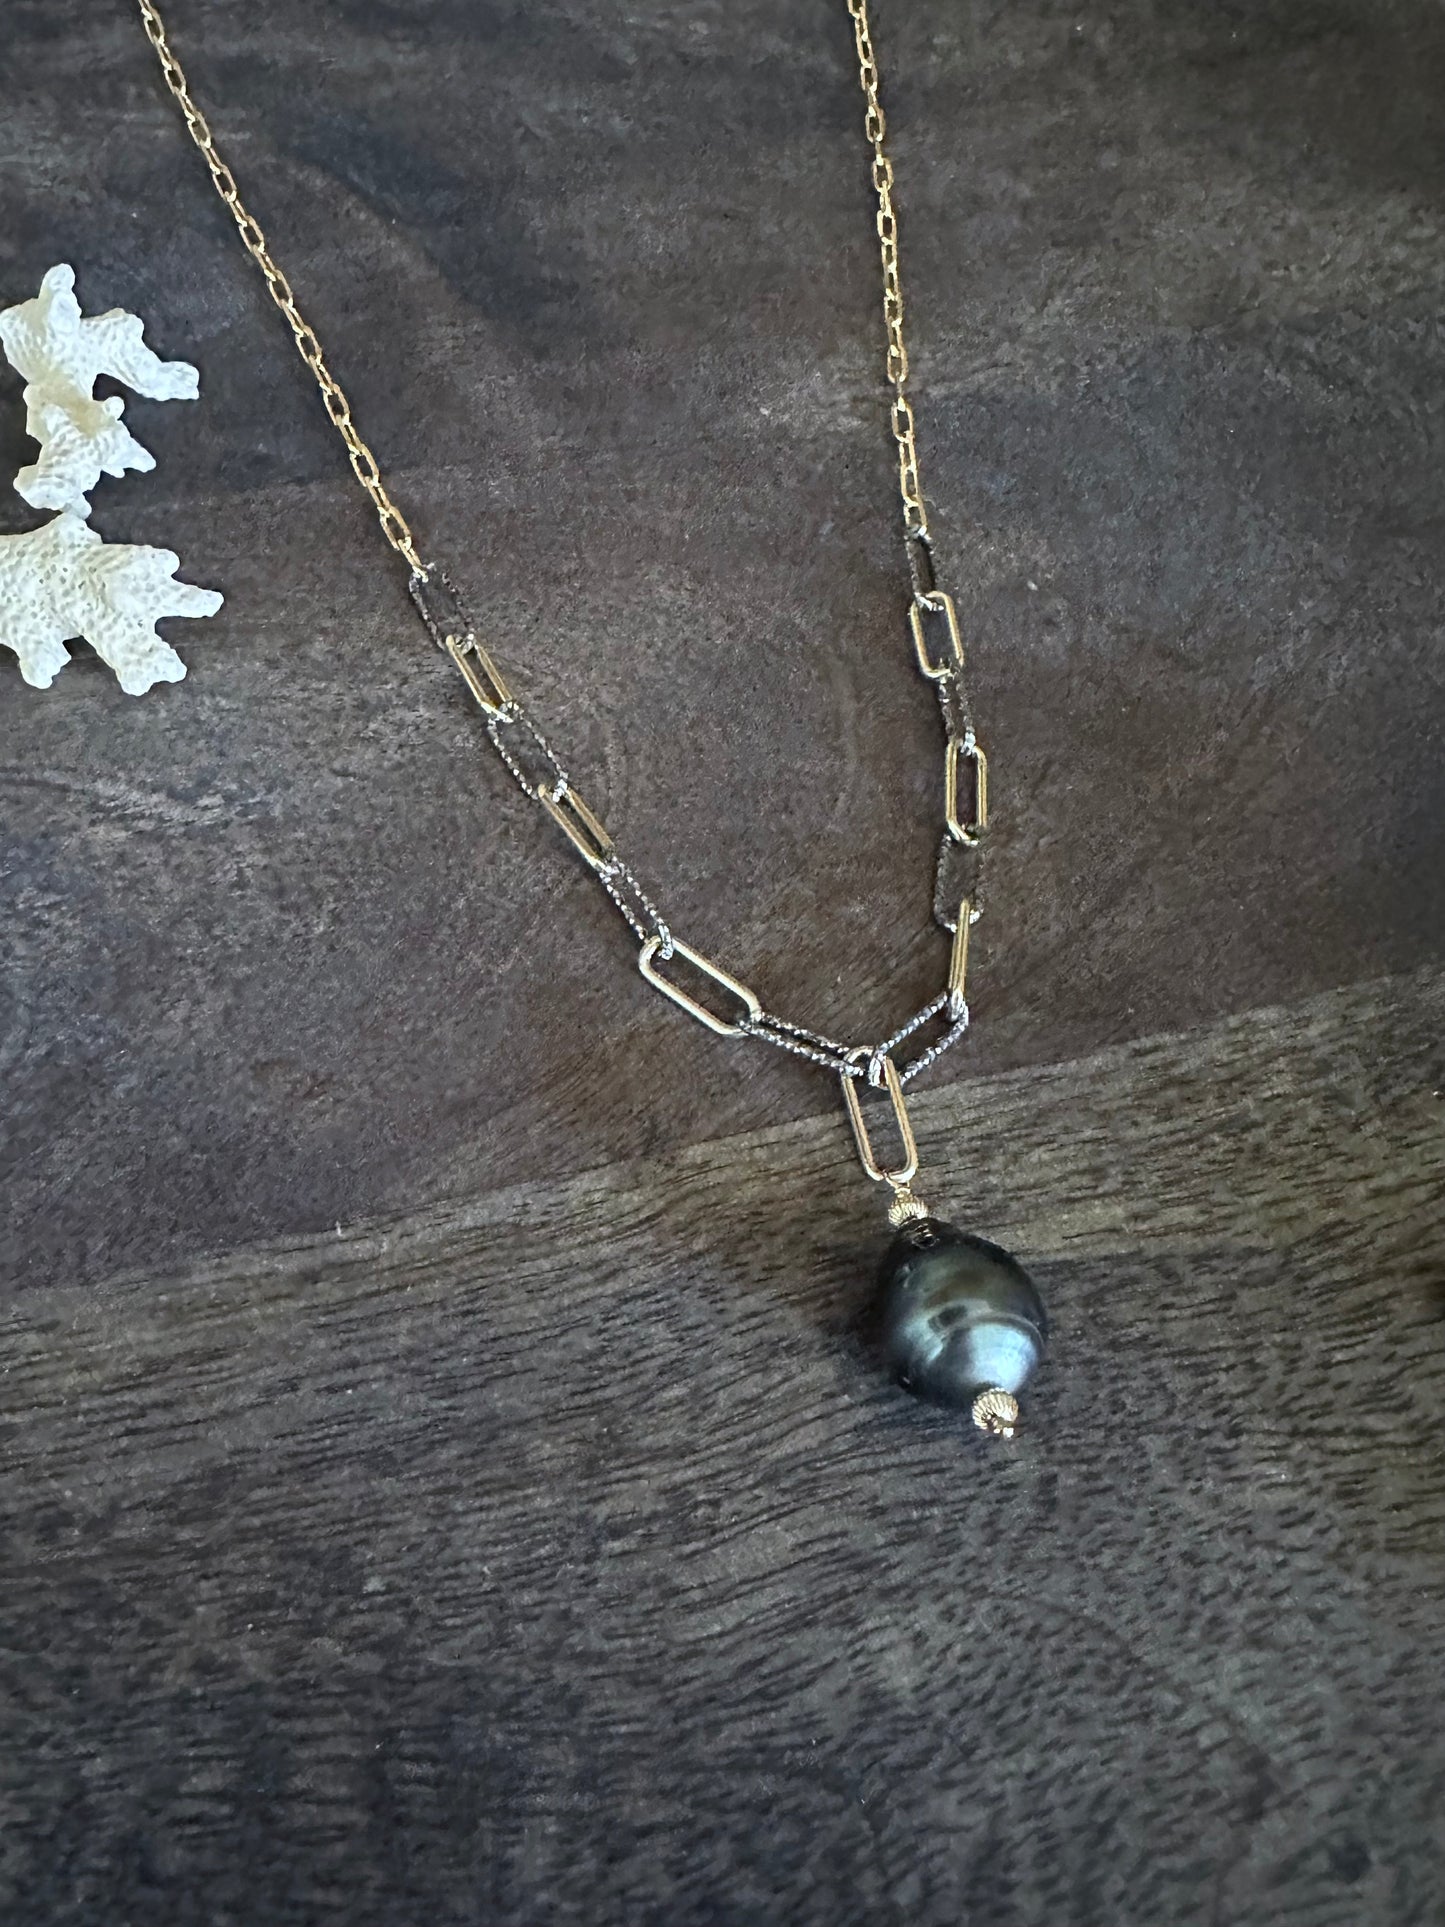 The Alchemy Necklace 24" Paperclip and Italian Mixed Metal Chain with 18mm Tahitian Pearl